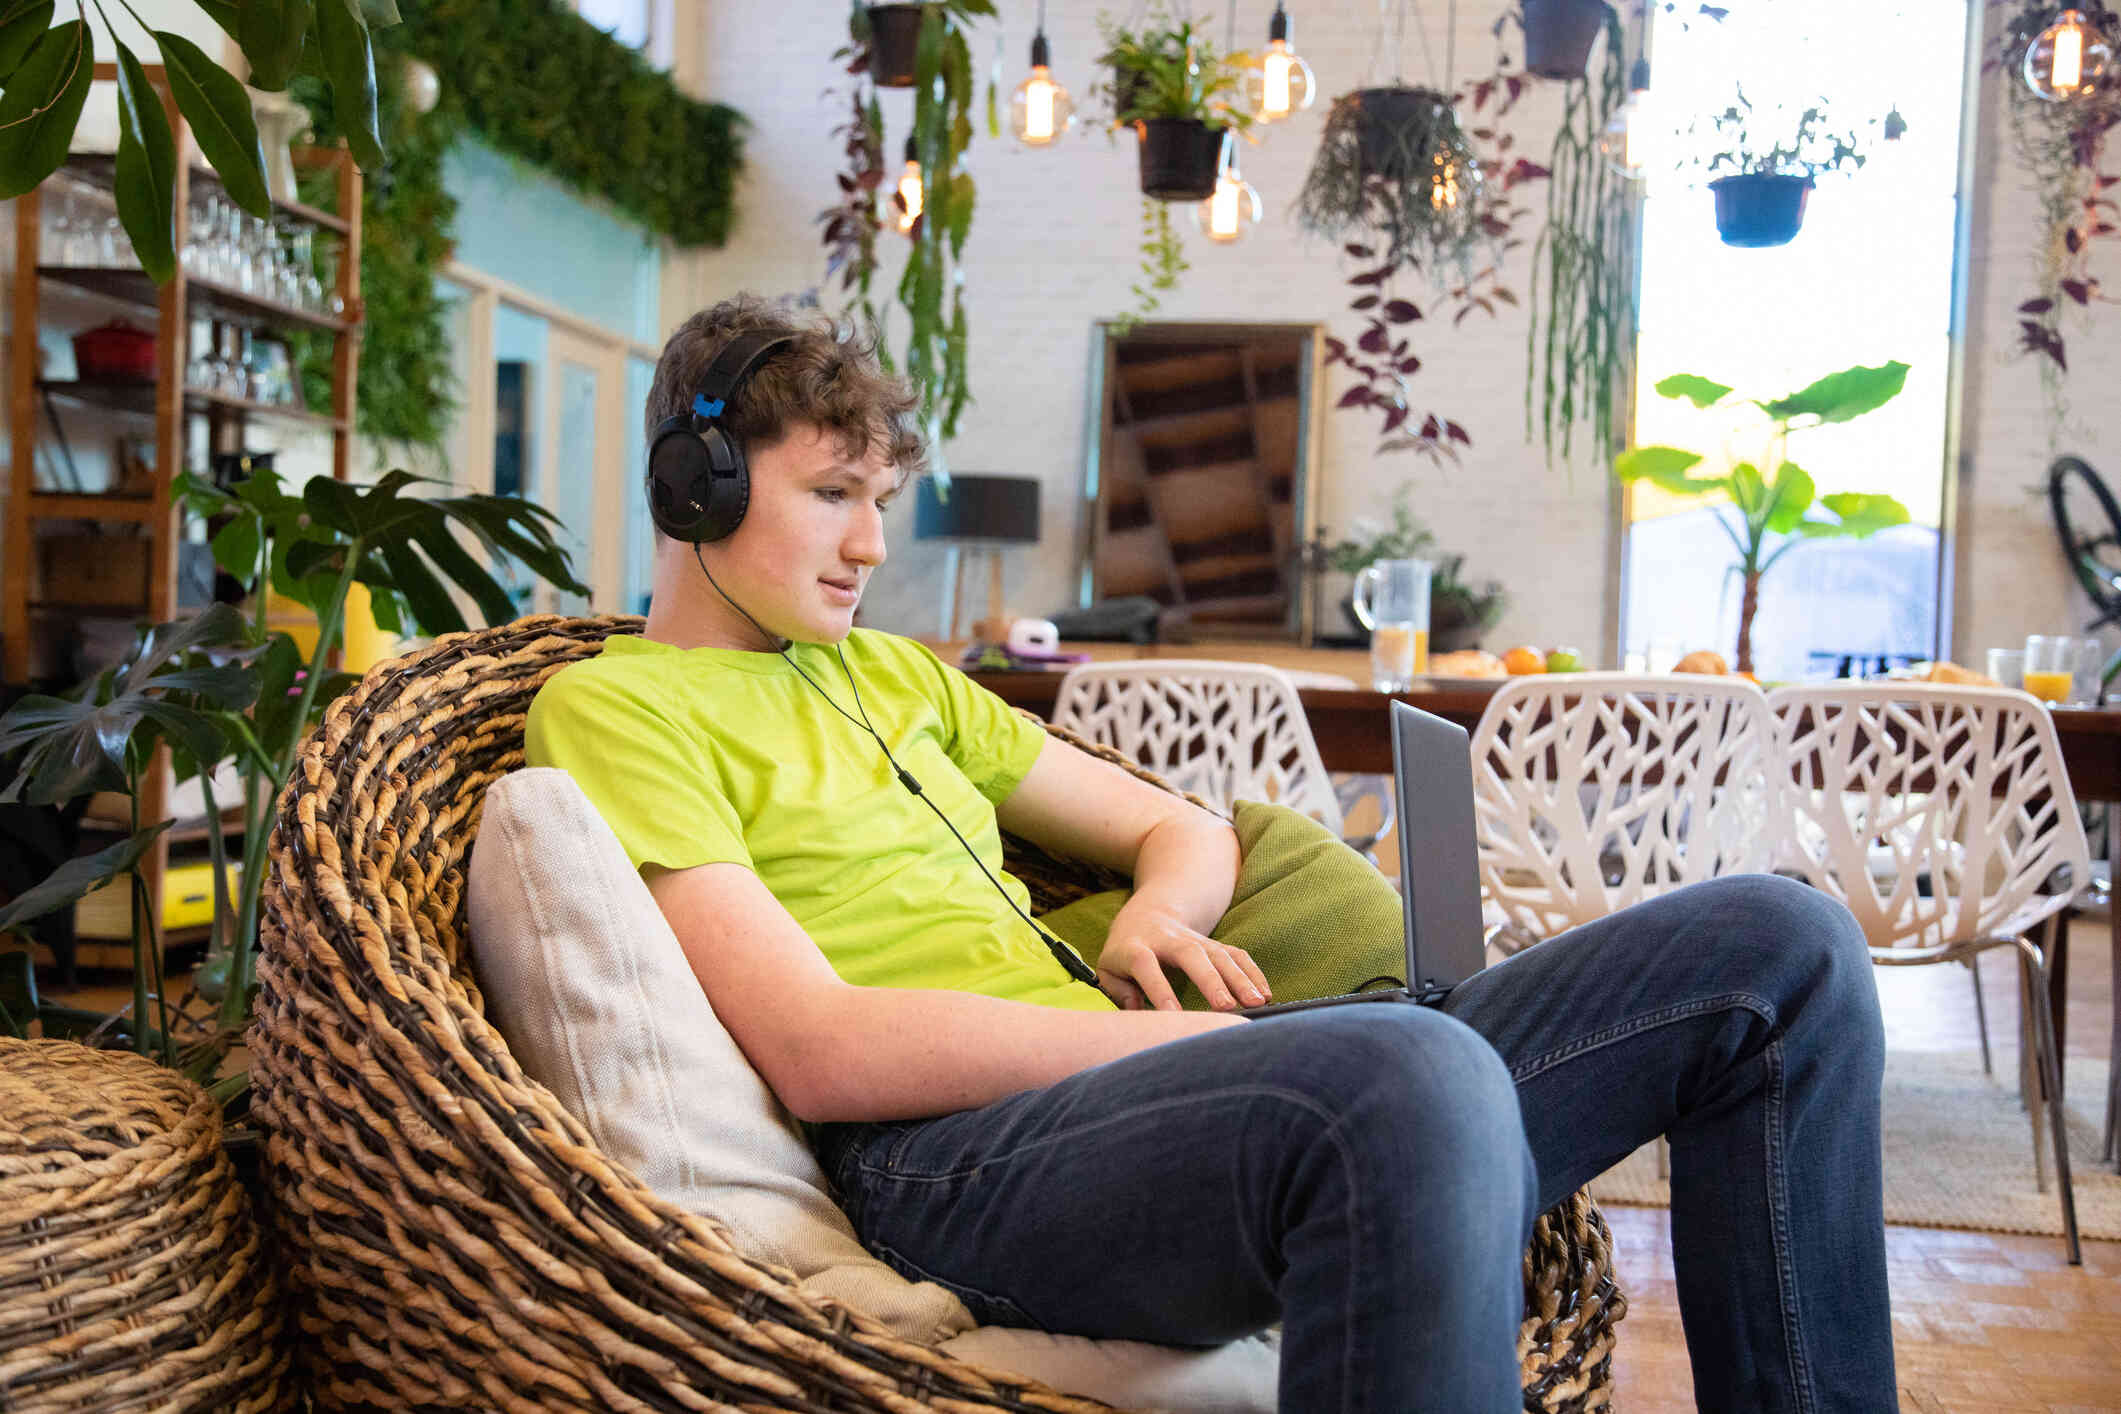 A teen boy in a green shirt sits in a wicker chair while wearing headphones and looks down at the laptop open in his lap.